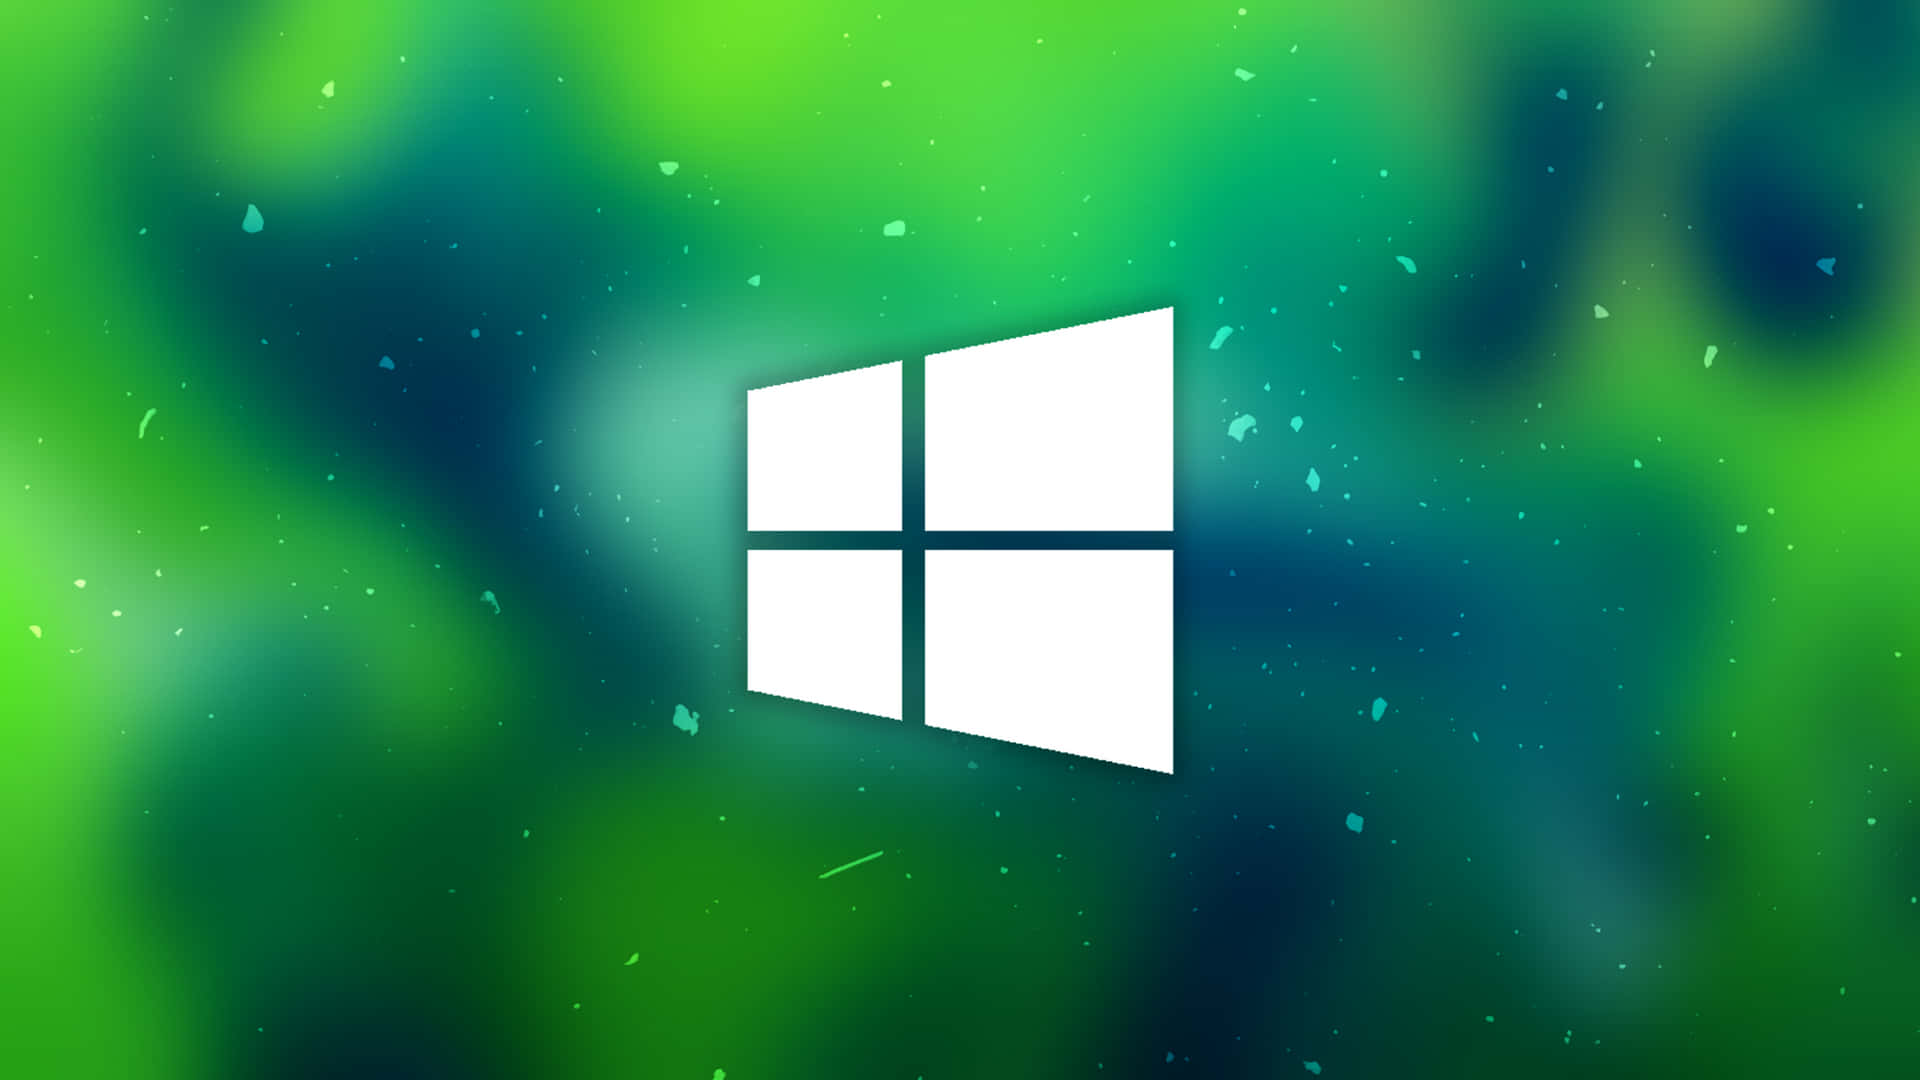 Keep up-to-date with Windows 10